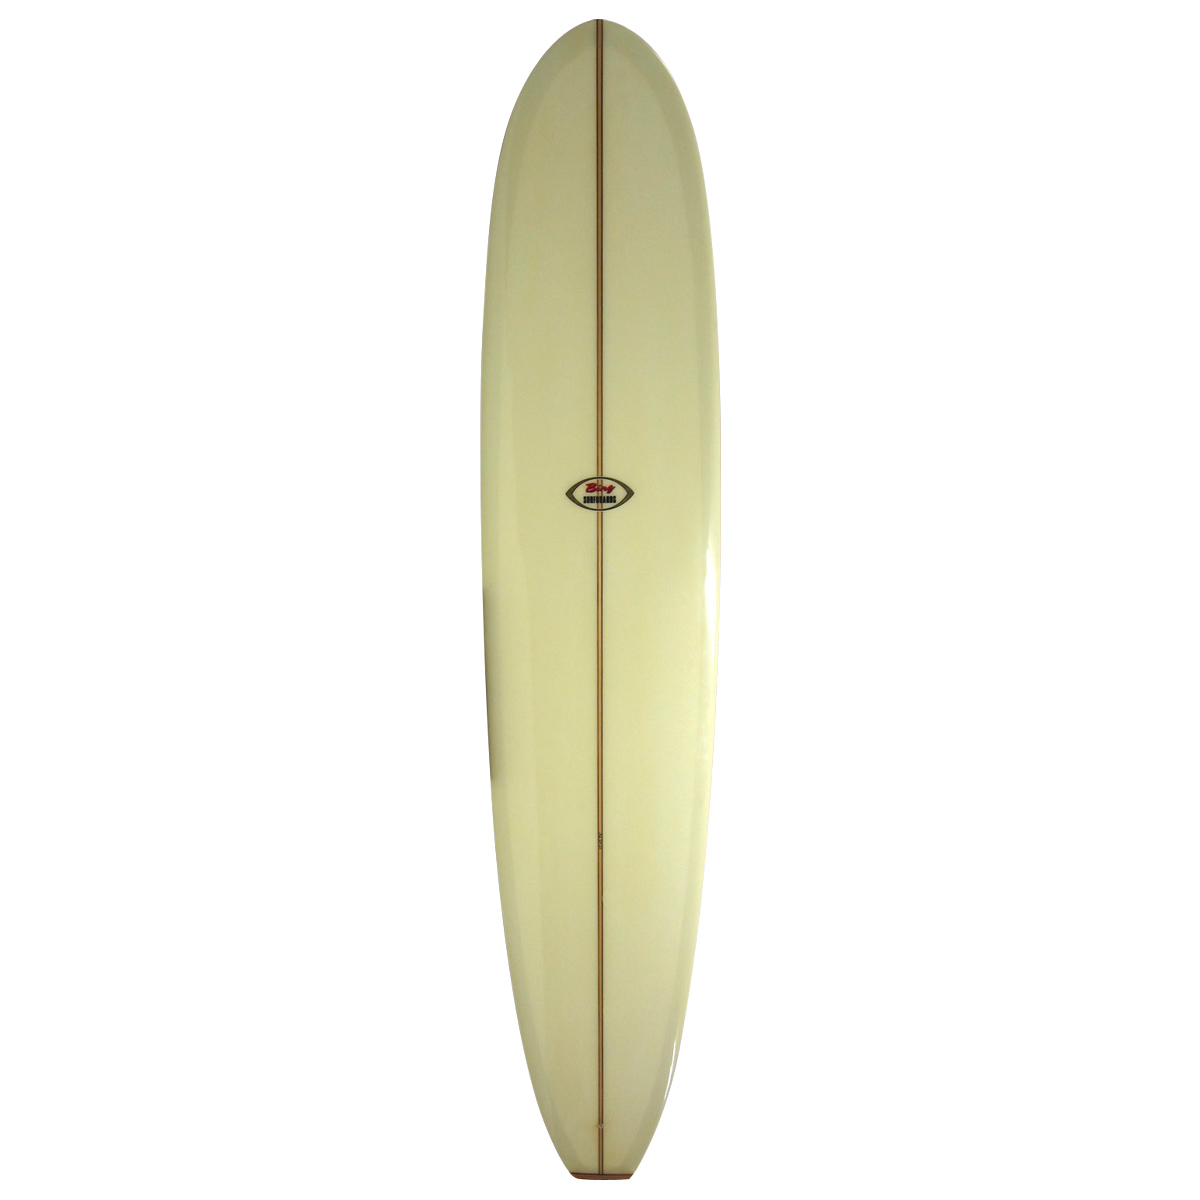 BING / Light Weight 9`6 Step Deck Shaped by Mike Eaton